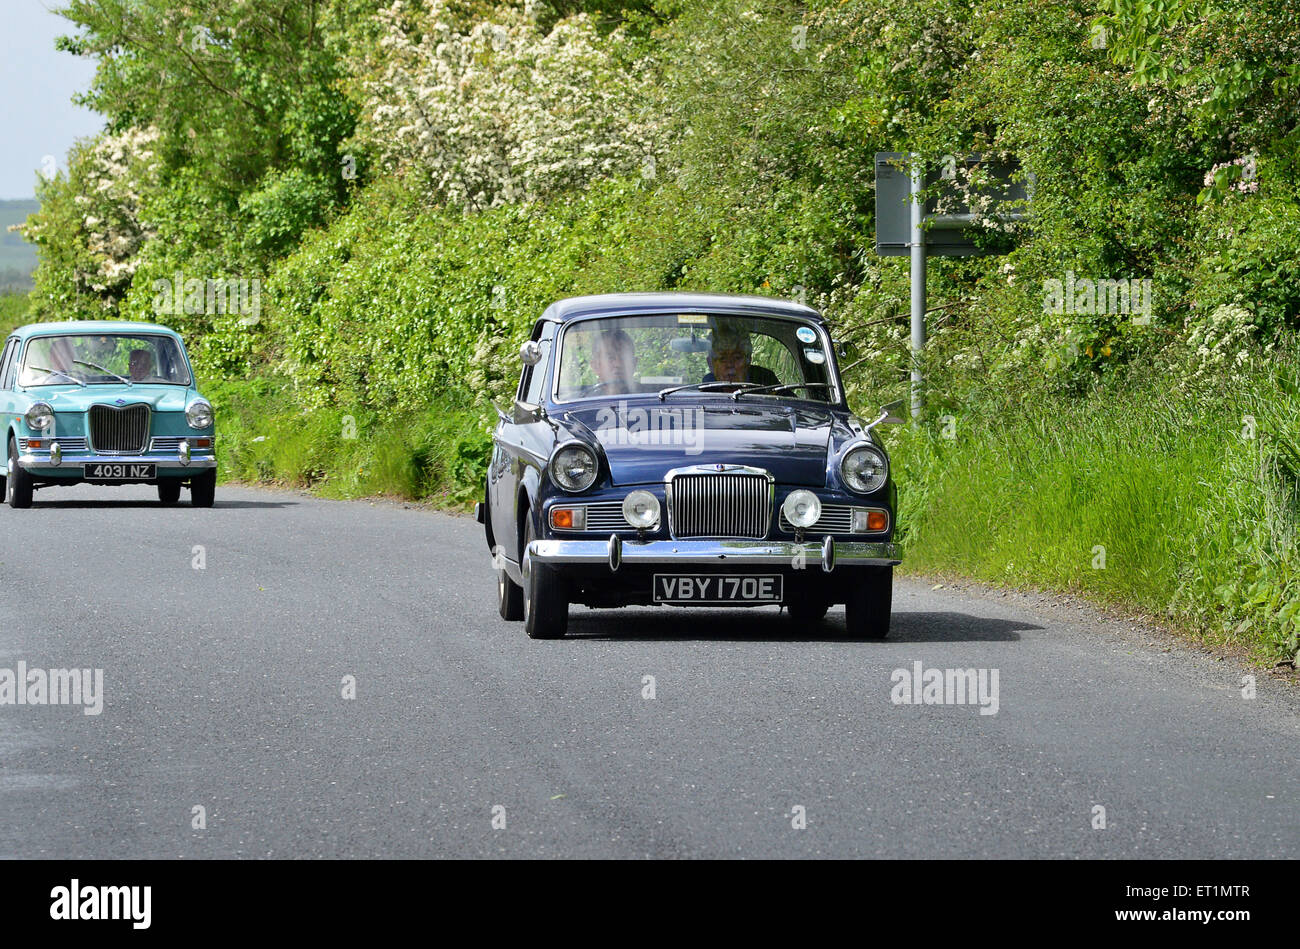 1965/67 Sunbeam Rapier Series V blue saloon on country road, Burnfoot, County Donegal, Ireland Stock Photo